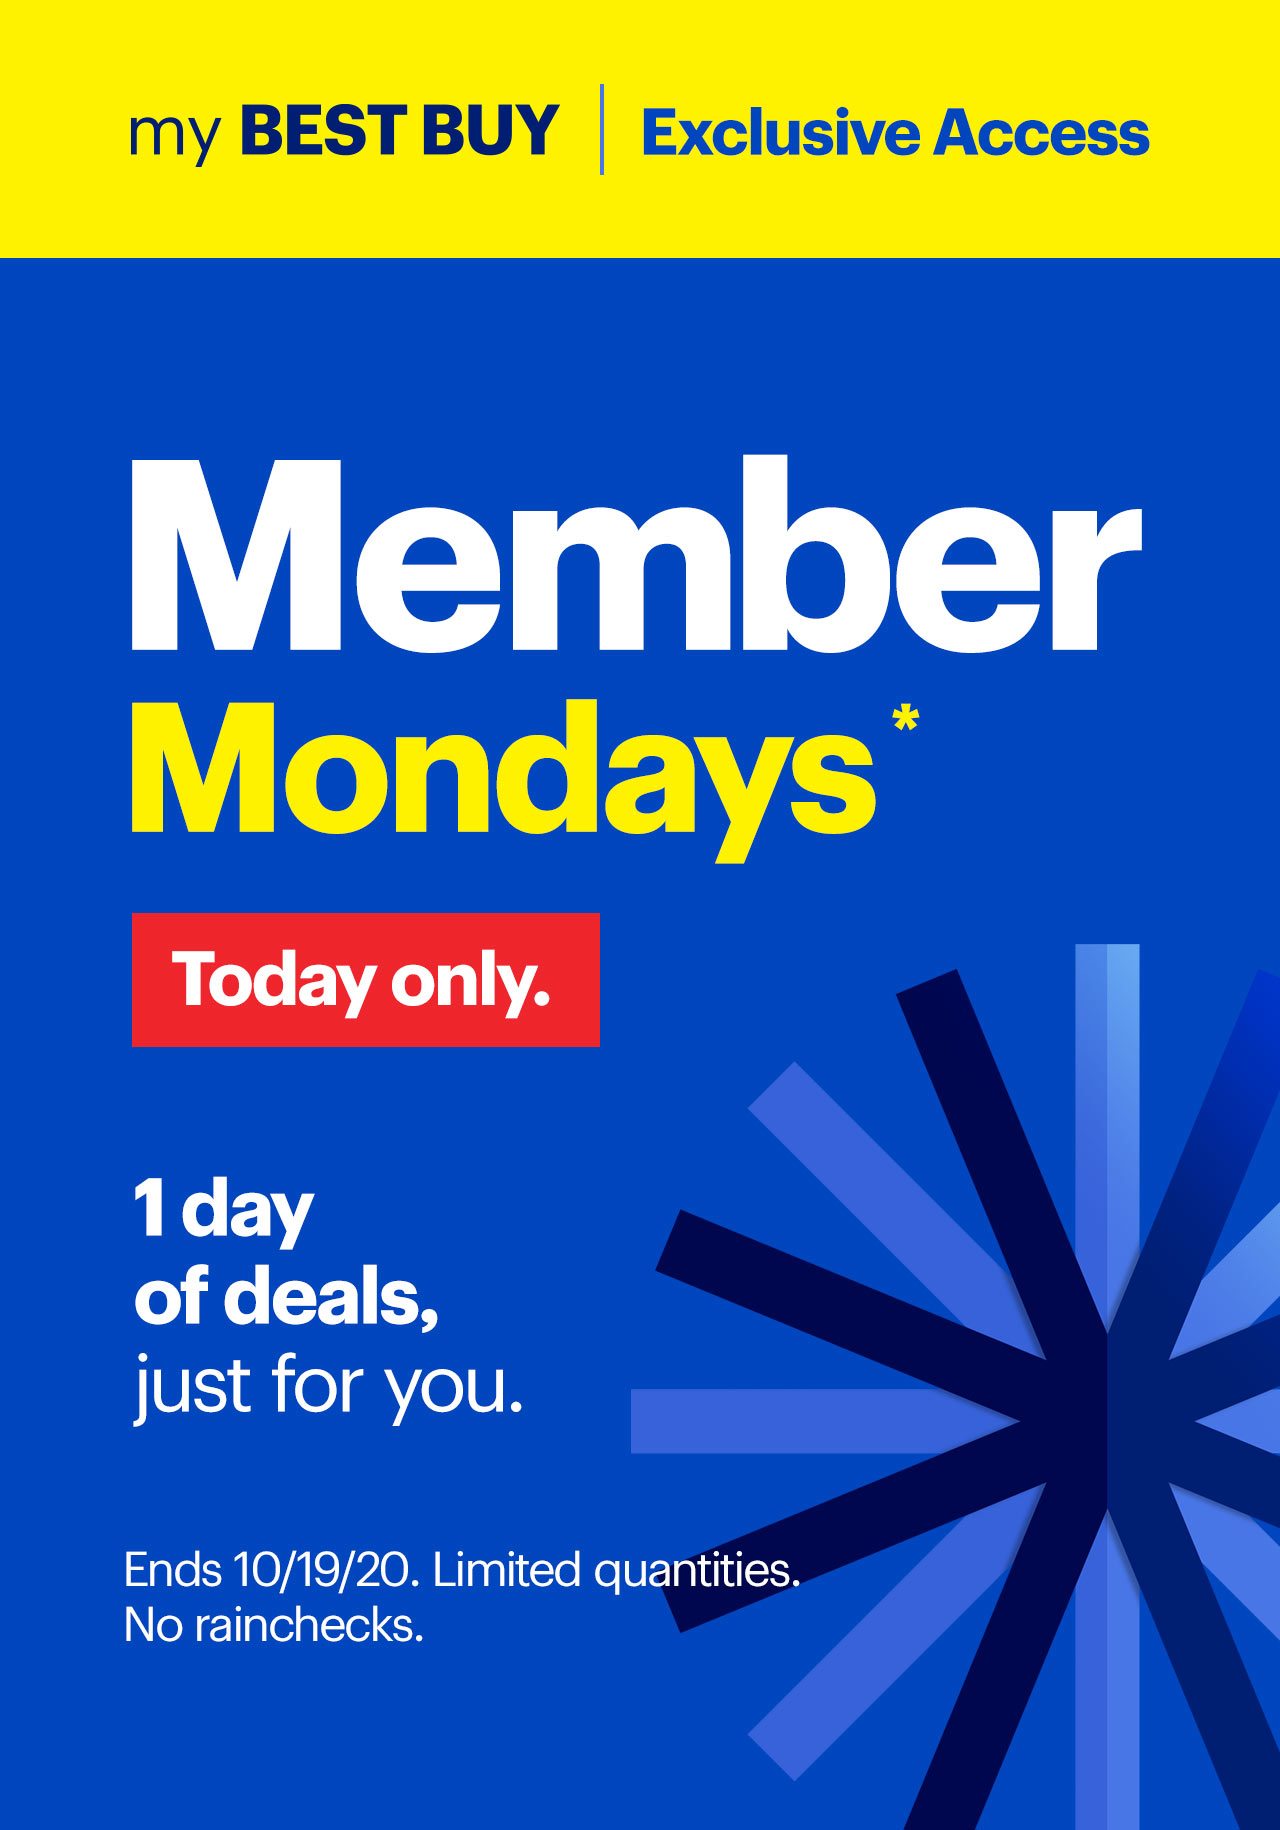 My Best Buy exclusive access. Member Mondays. Today only. One day of deals just for you. Shop now. Reference disclaimer.